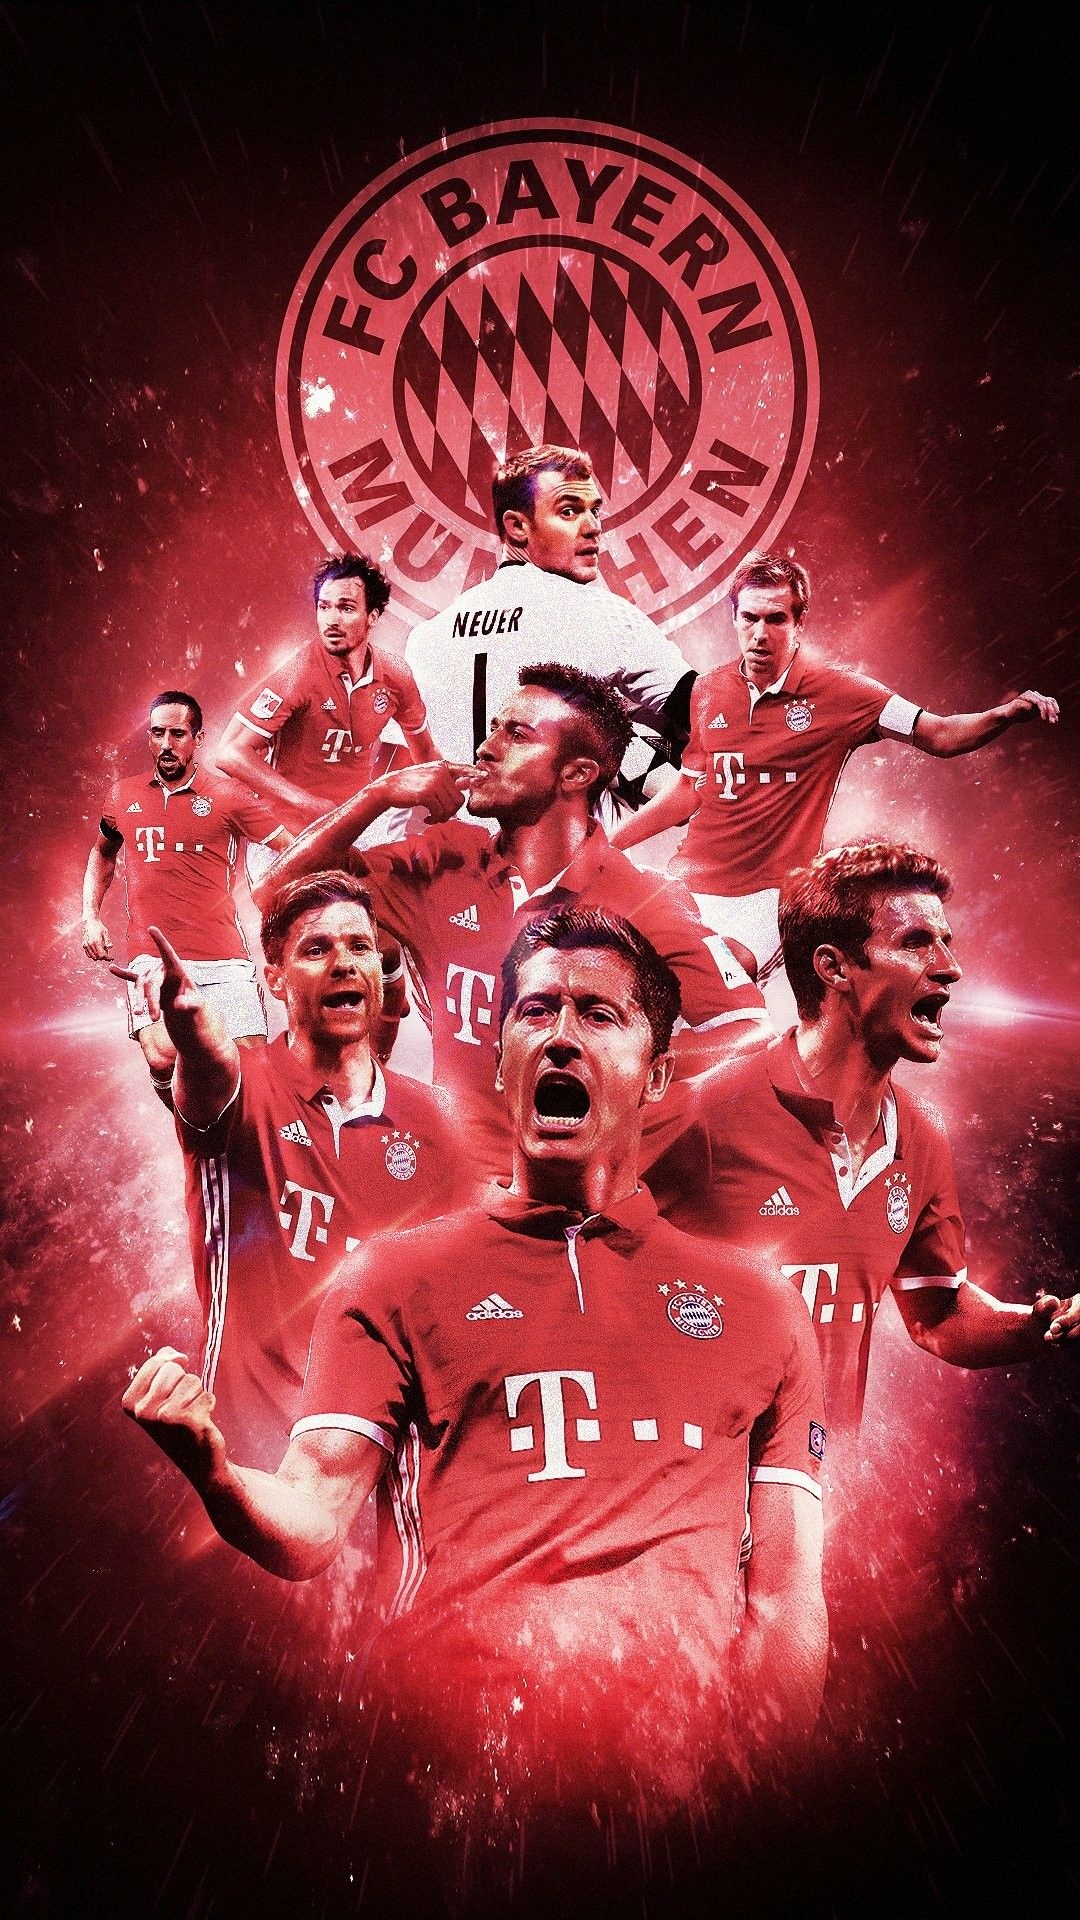 Bayern Munchen FC: Traditional local rivalries with 1860 Munich and 1. FC Nürnberg, as well as with Borussia Dortmund since the mid-1990s. 1080x1920 Full HD Background.